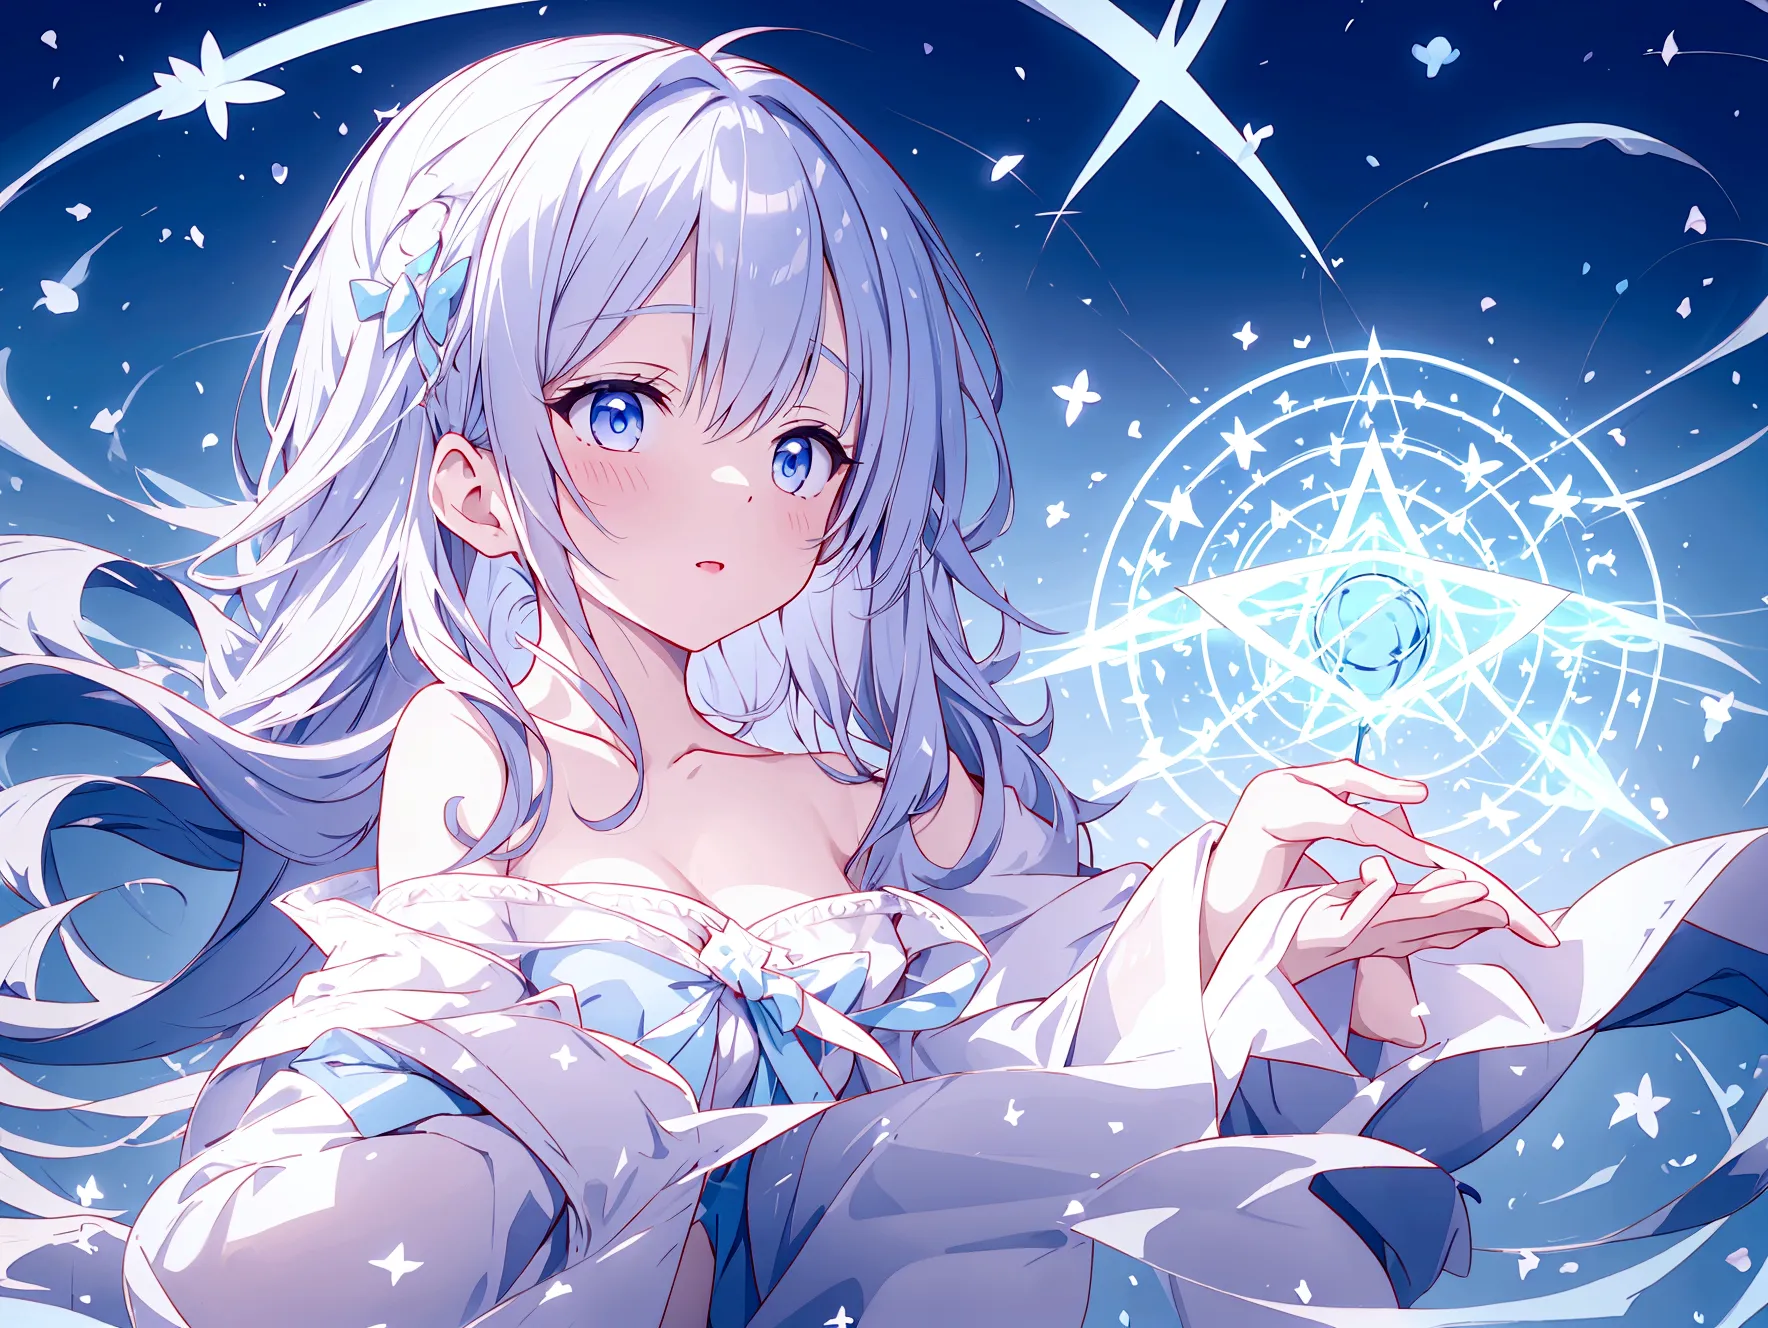 Naked and wearing a magic robe、Pure white magic robe、Cute frilly light blue underwear、Magic wand